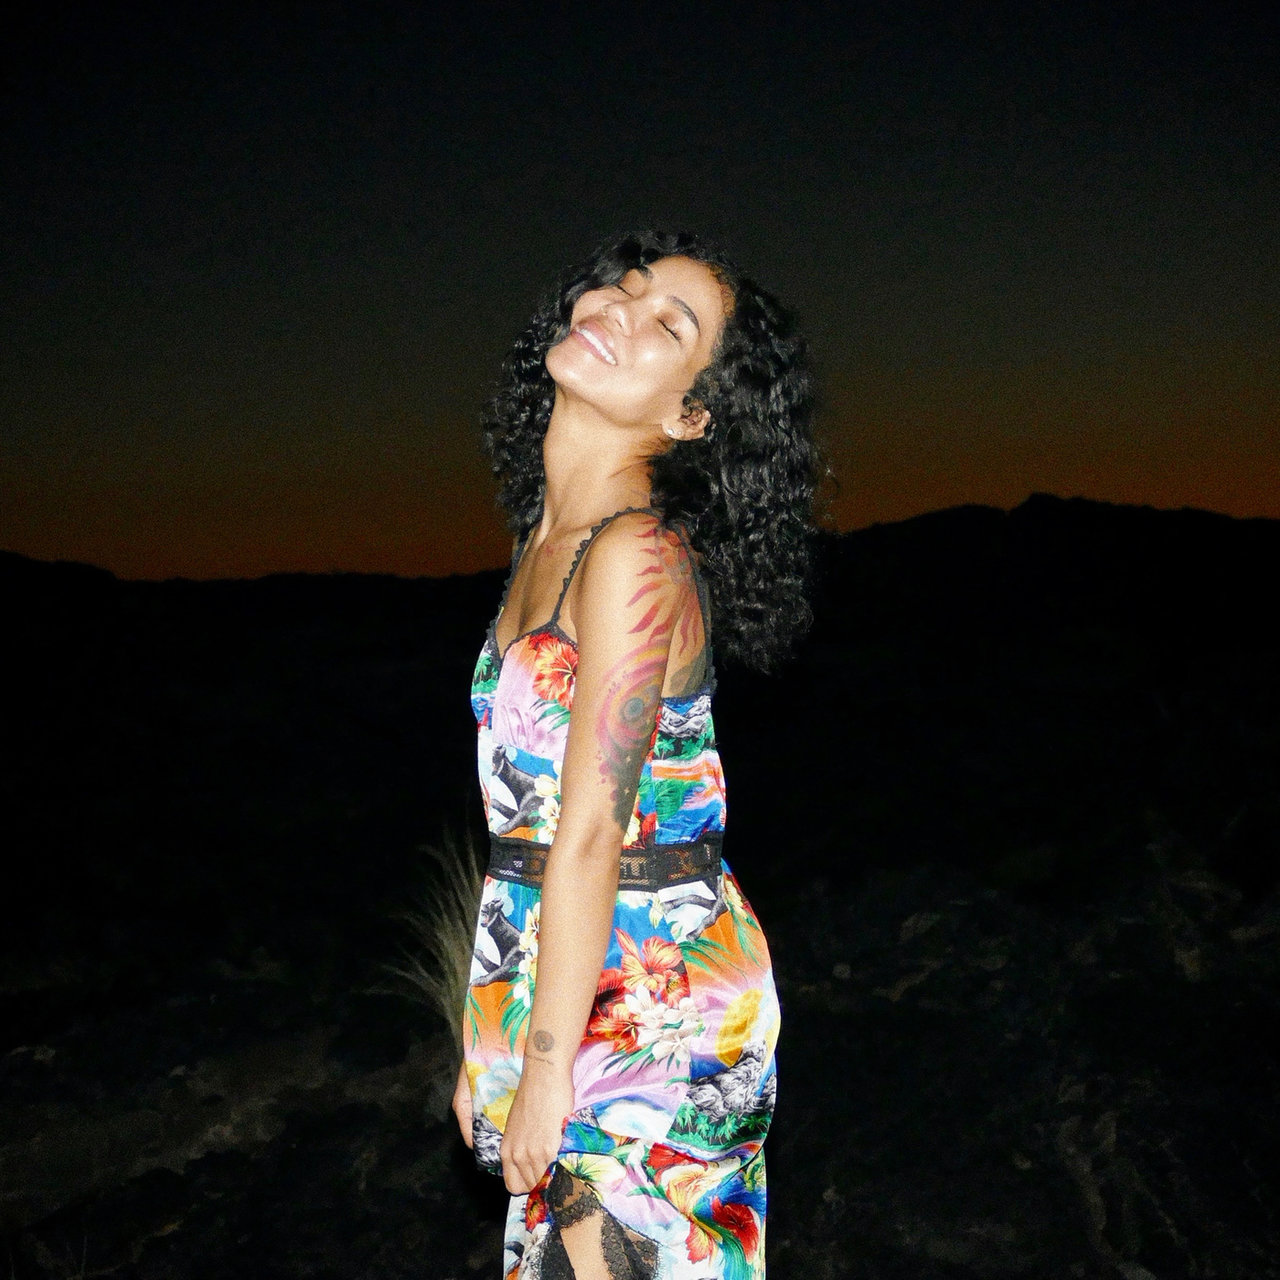 Jhené Aiko - Happiness Over Everything (H.O.E.) (ft. Future and Miguel) (Cover)